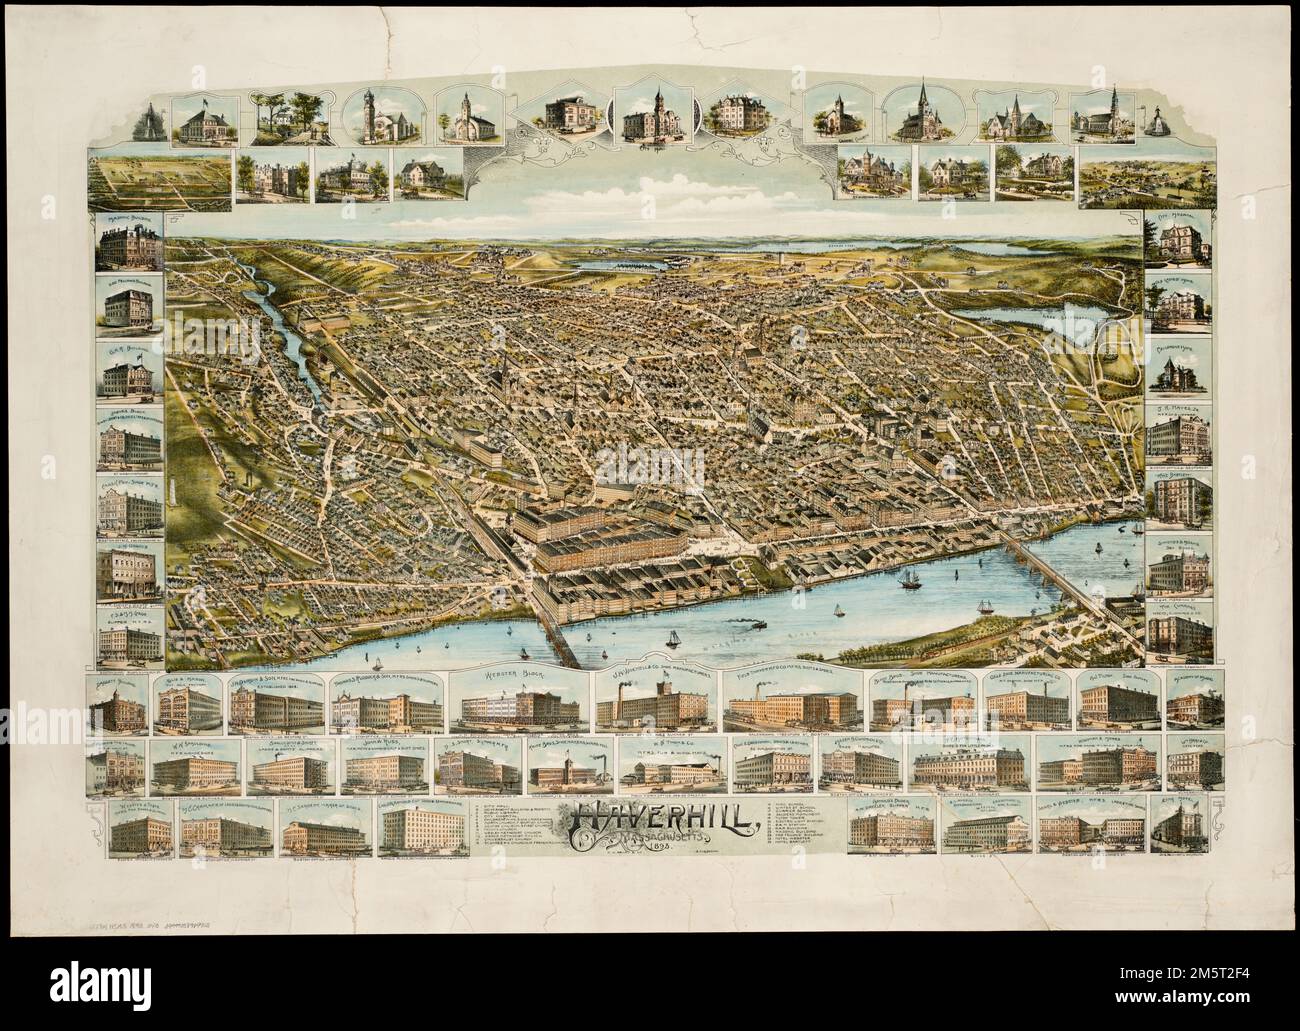 Haverhill, Massachusetts : 1893. Bird's-eye view. Includes ill. and index to points of interest.. Haverhill, located on the north side of the Merrimack River, is depicted from the south in this colorful bird's eye view. This composition focuses on the city's waterfront and central business district. Several larger factories, located near the railroad tracks and small tributary Little Rive rare positioned just left of center. However, the true nature of the city's industrial and commercial activity is captured in the marginal insets. Of the sixty-four vignettes, twenty-eight depicted boot, shoe Stock Photo